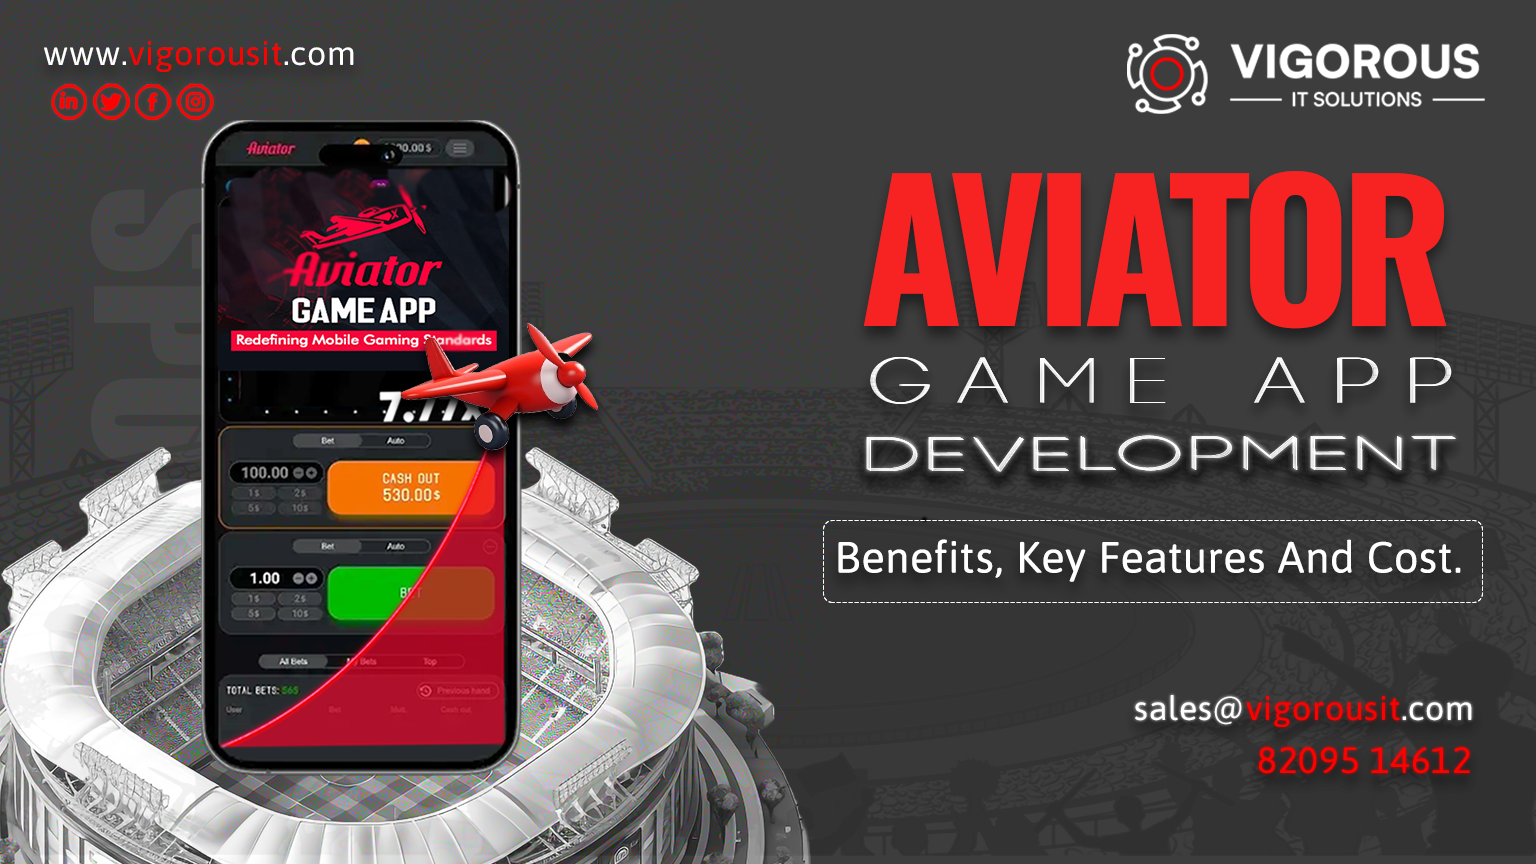 Aviator Game App Development Benefits, Features, and Cost